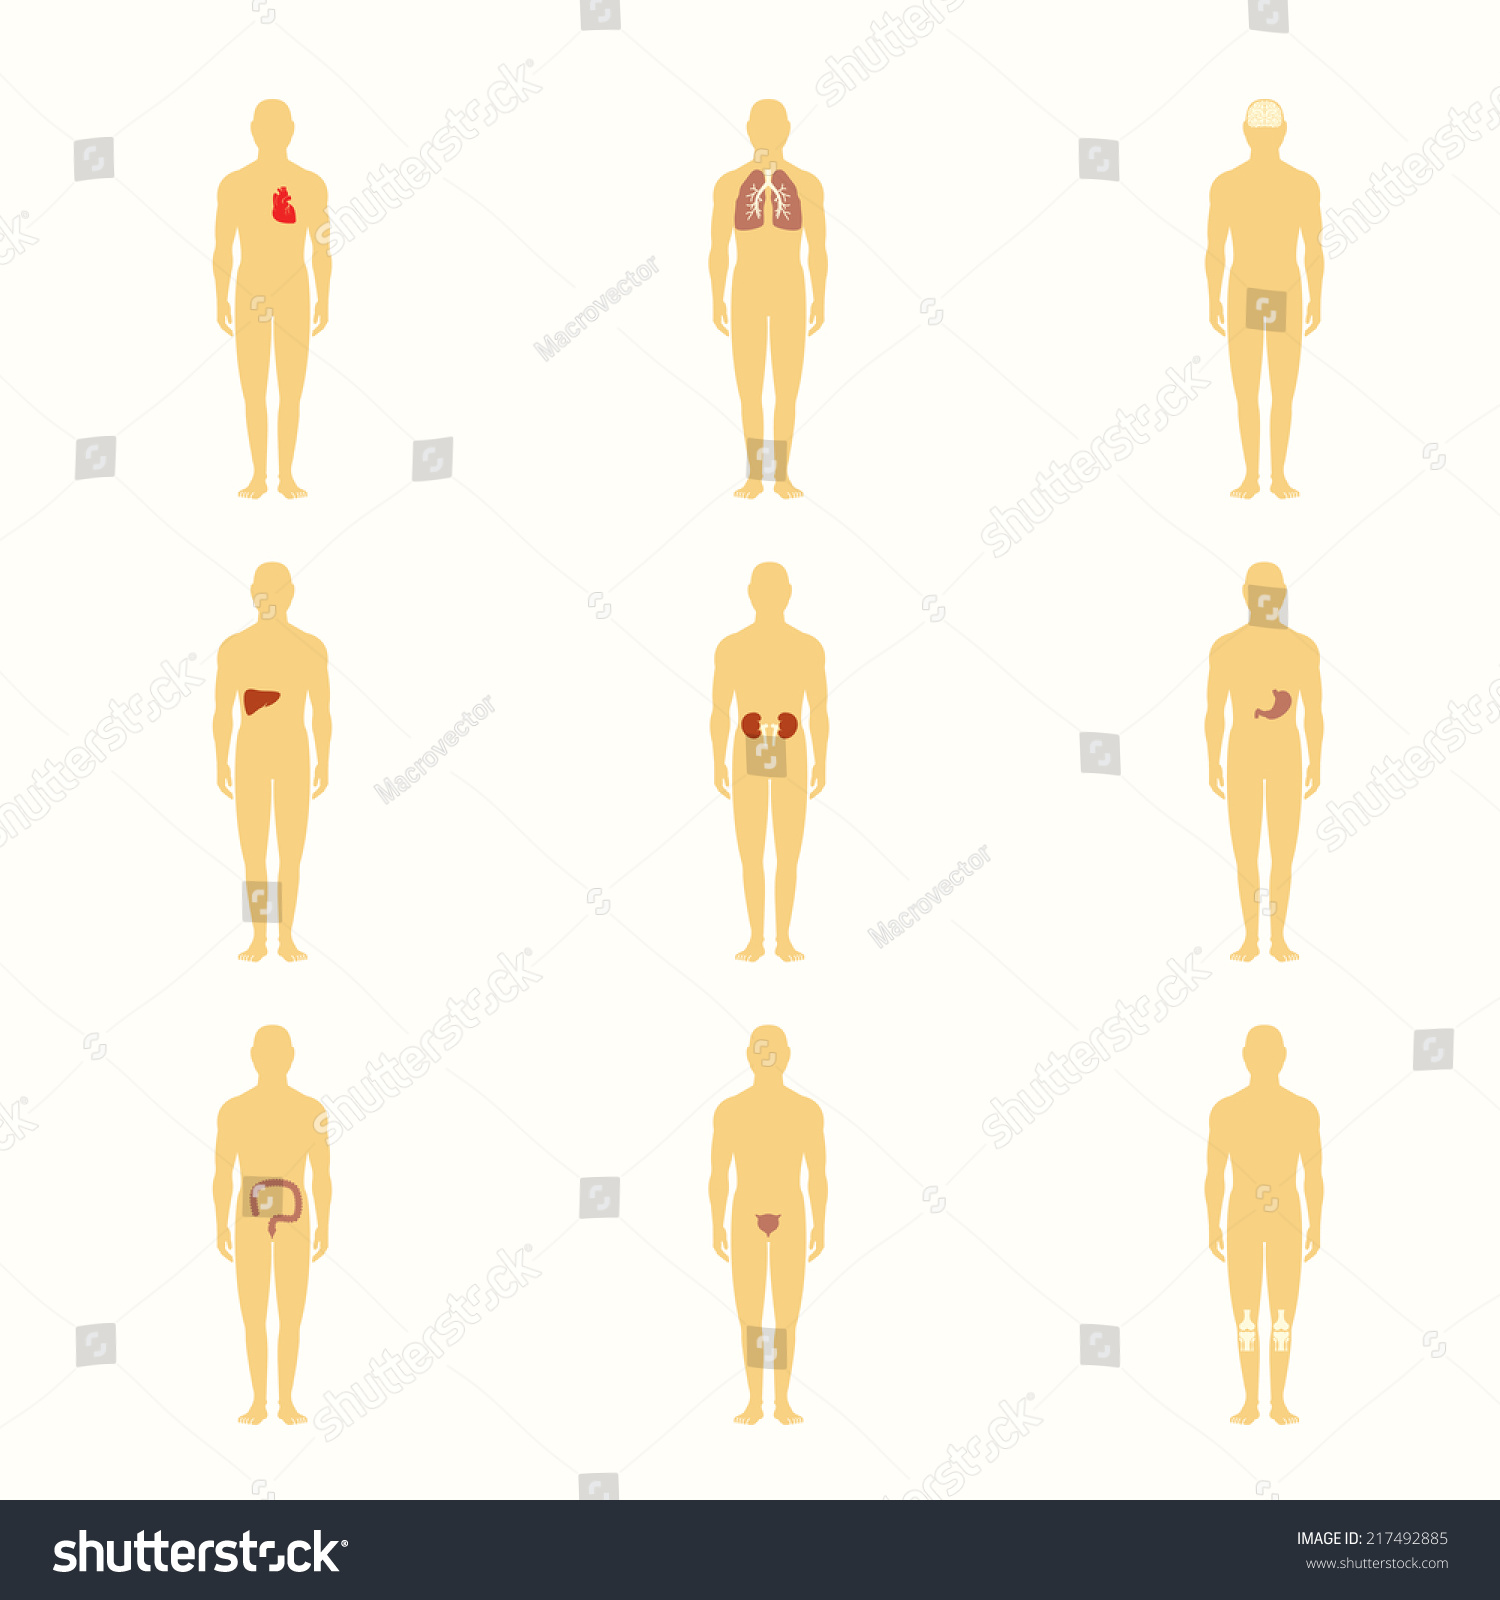 Human Male Silhouette Figures With Internal Organs Icons Set Isolated ...